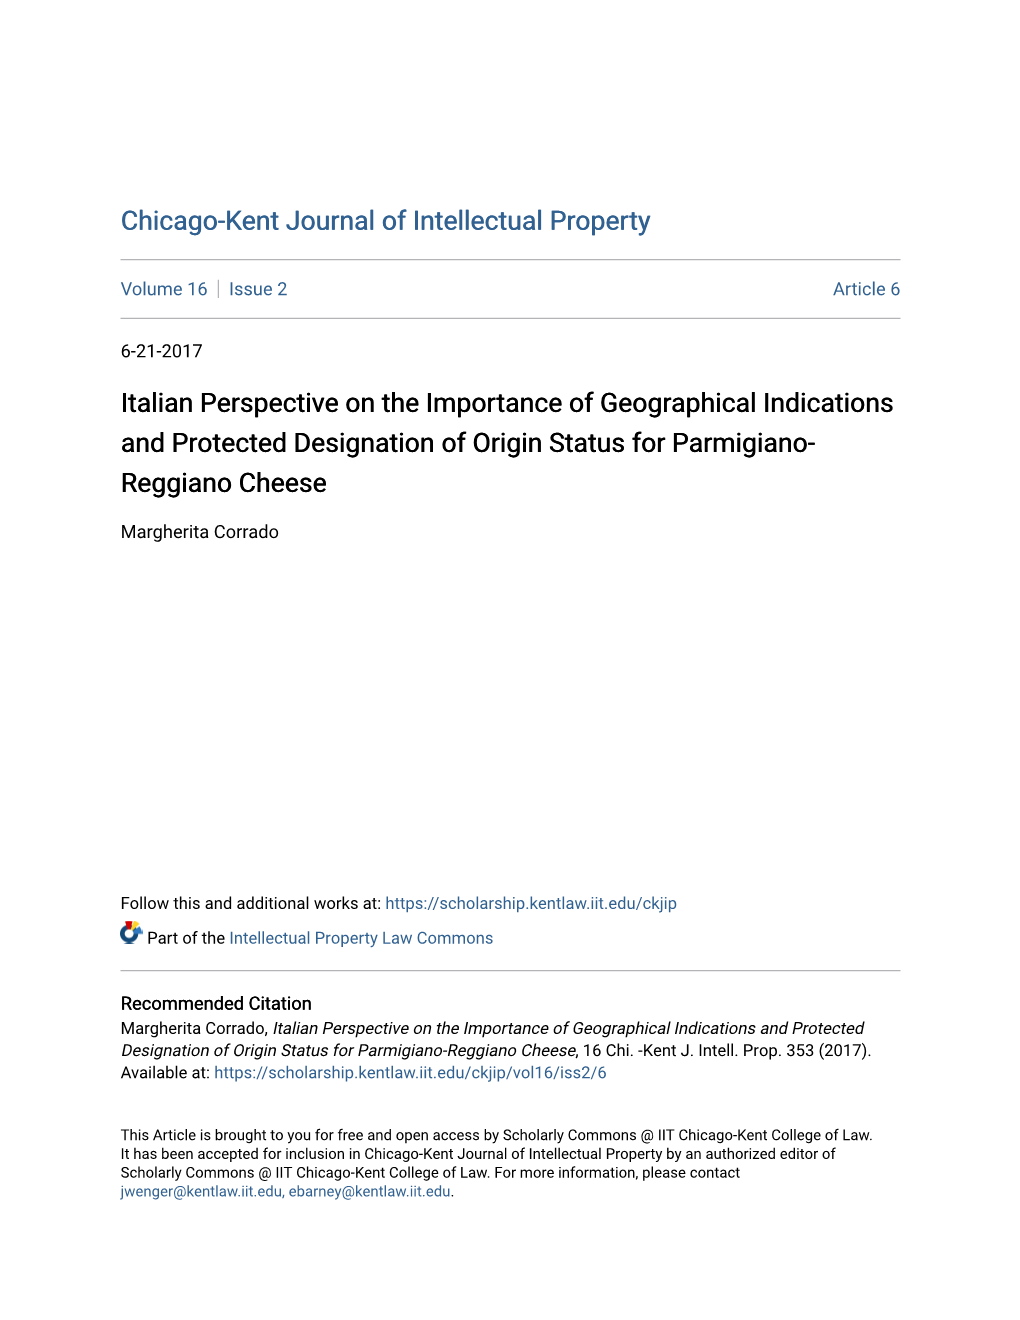 Italian Perspective on the Importance of Geographical Indications and Protected Designation of Origin Status for Parmigiano-Reggiano Cheese, 16 Chi